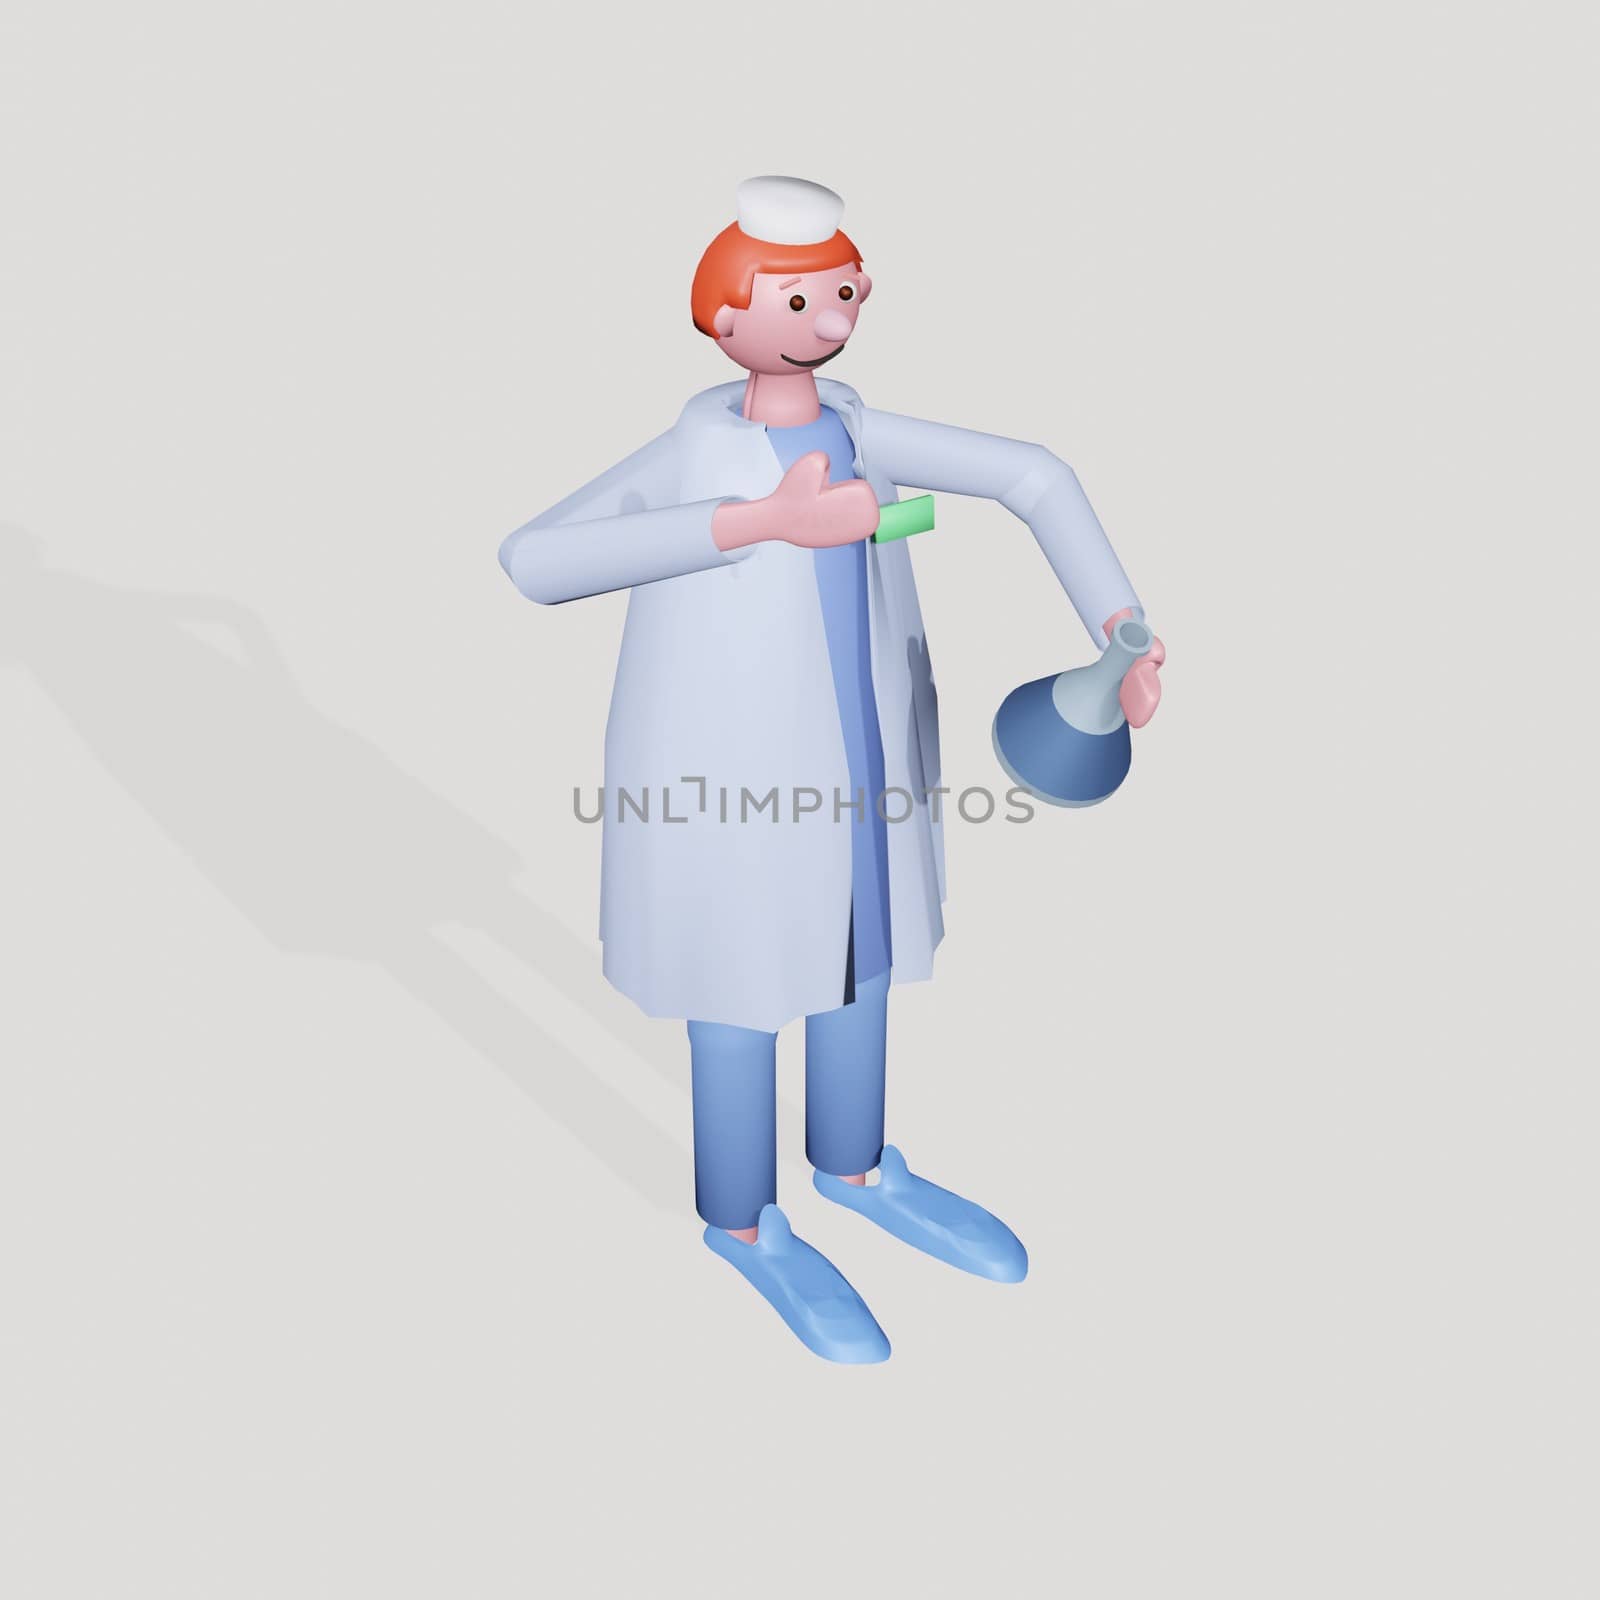 Medical scientist with a medical mask holding a glass test tube with liquid medicine or vaccine for the virus. Illustration in a cute plasticine style, 3D render volumetric view. by zaryov